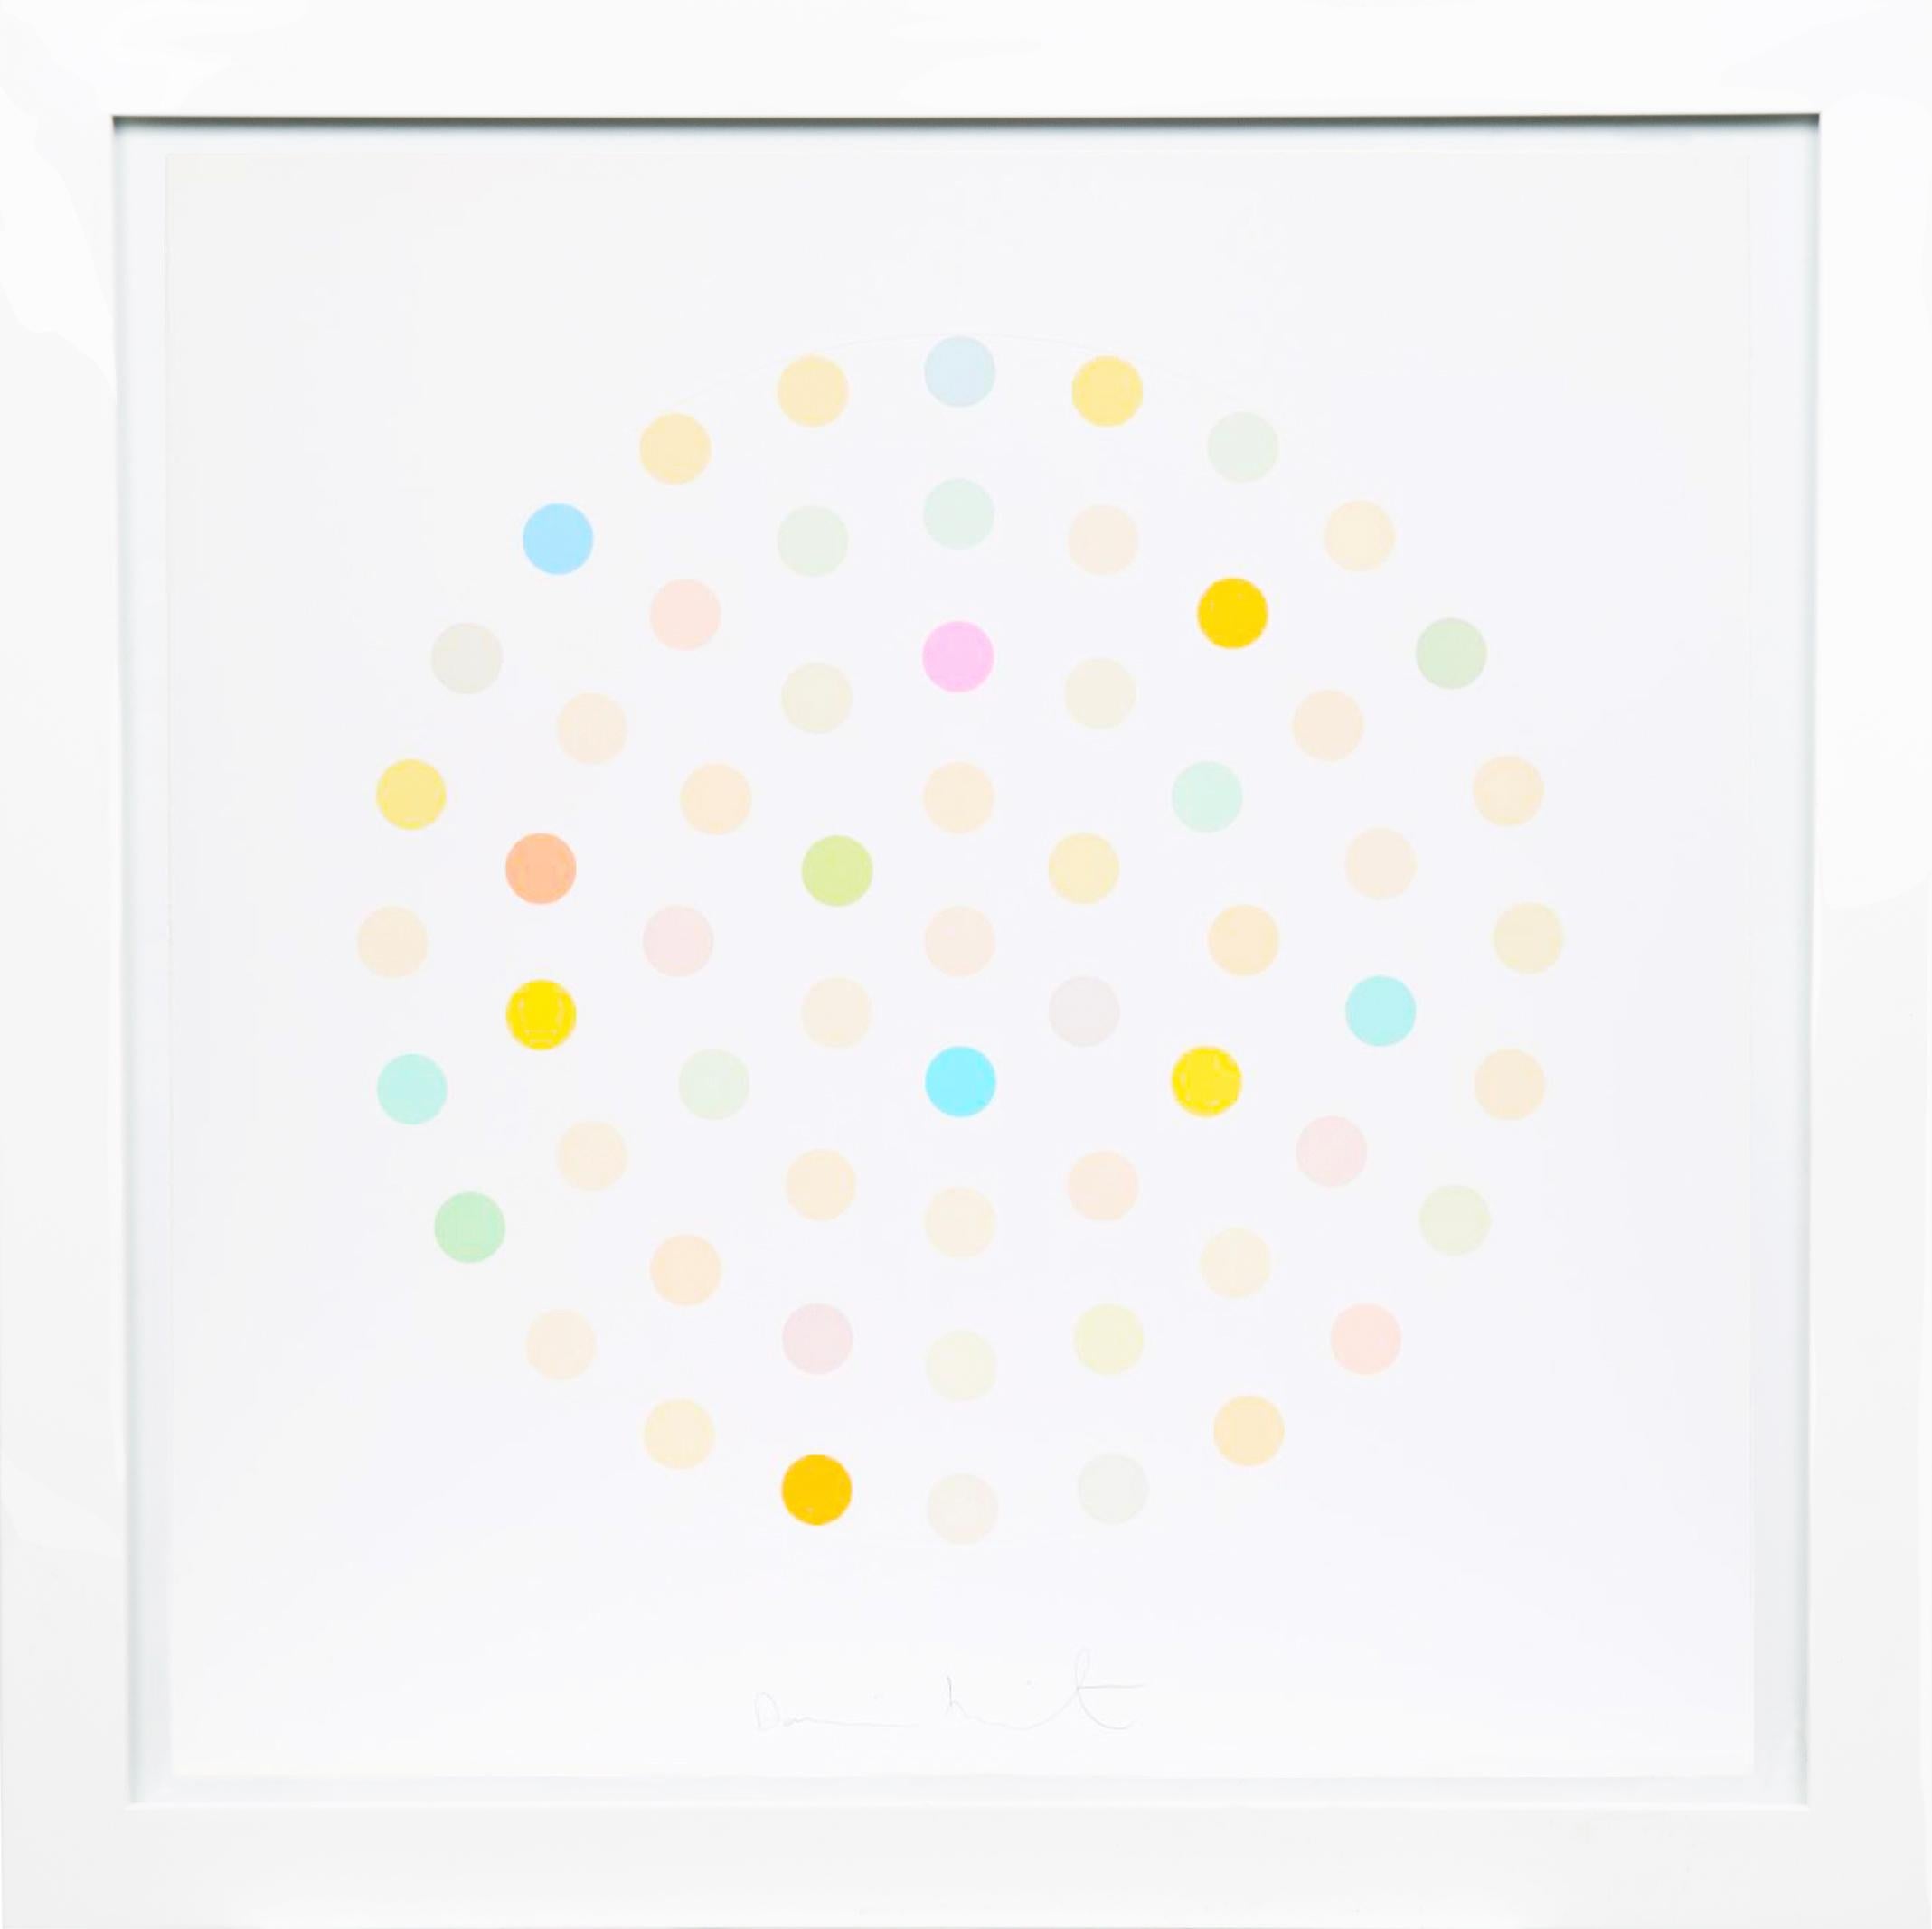 The Pastel Spots by Damien Hirst is hand etched with aquatint in his signature, never repeated, palette of stunning pastoral colors. Signed by the artist in pencil in the lower center, numbered on verso. This artwork comes in a custom museum caliber